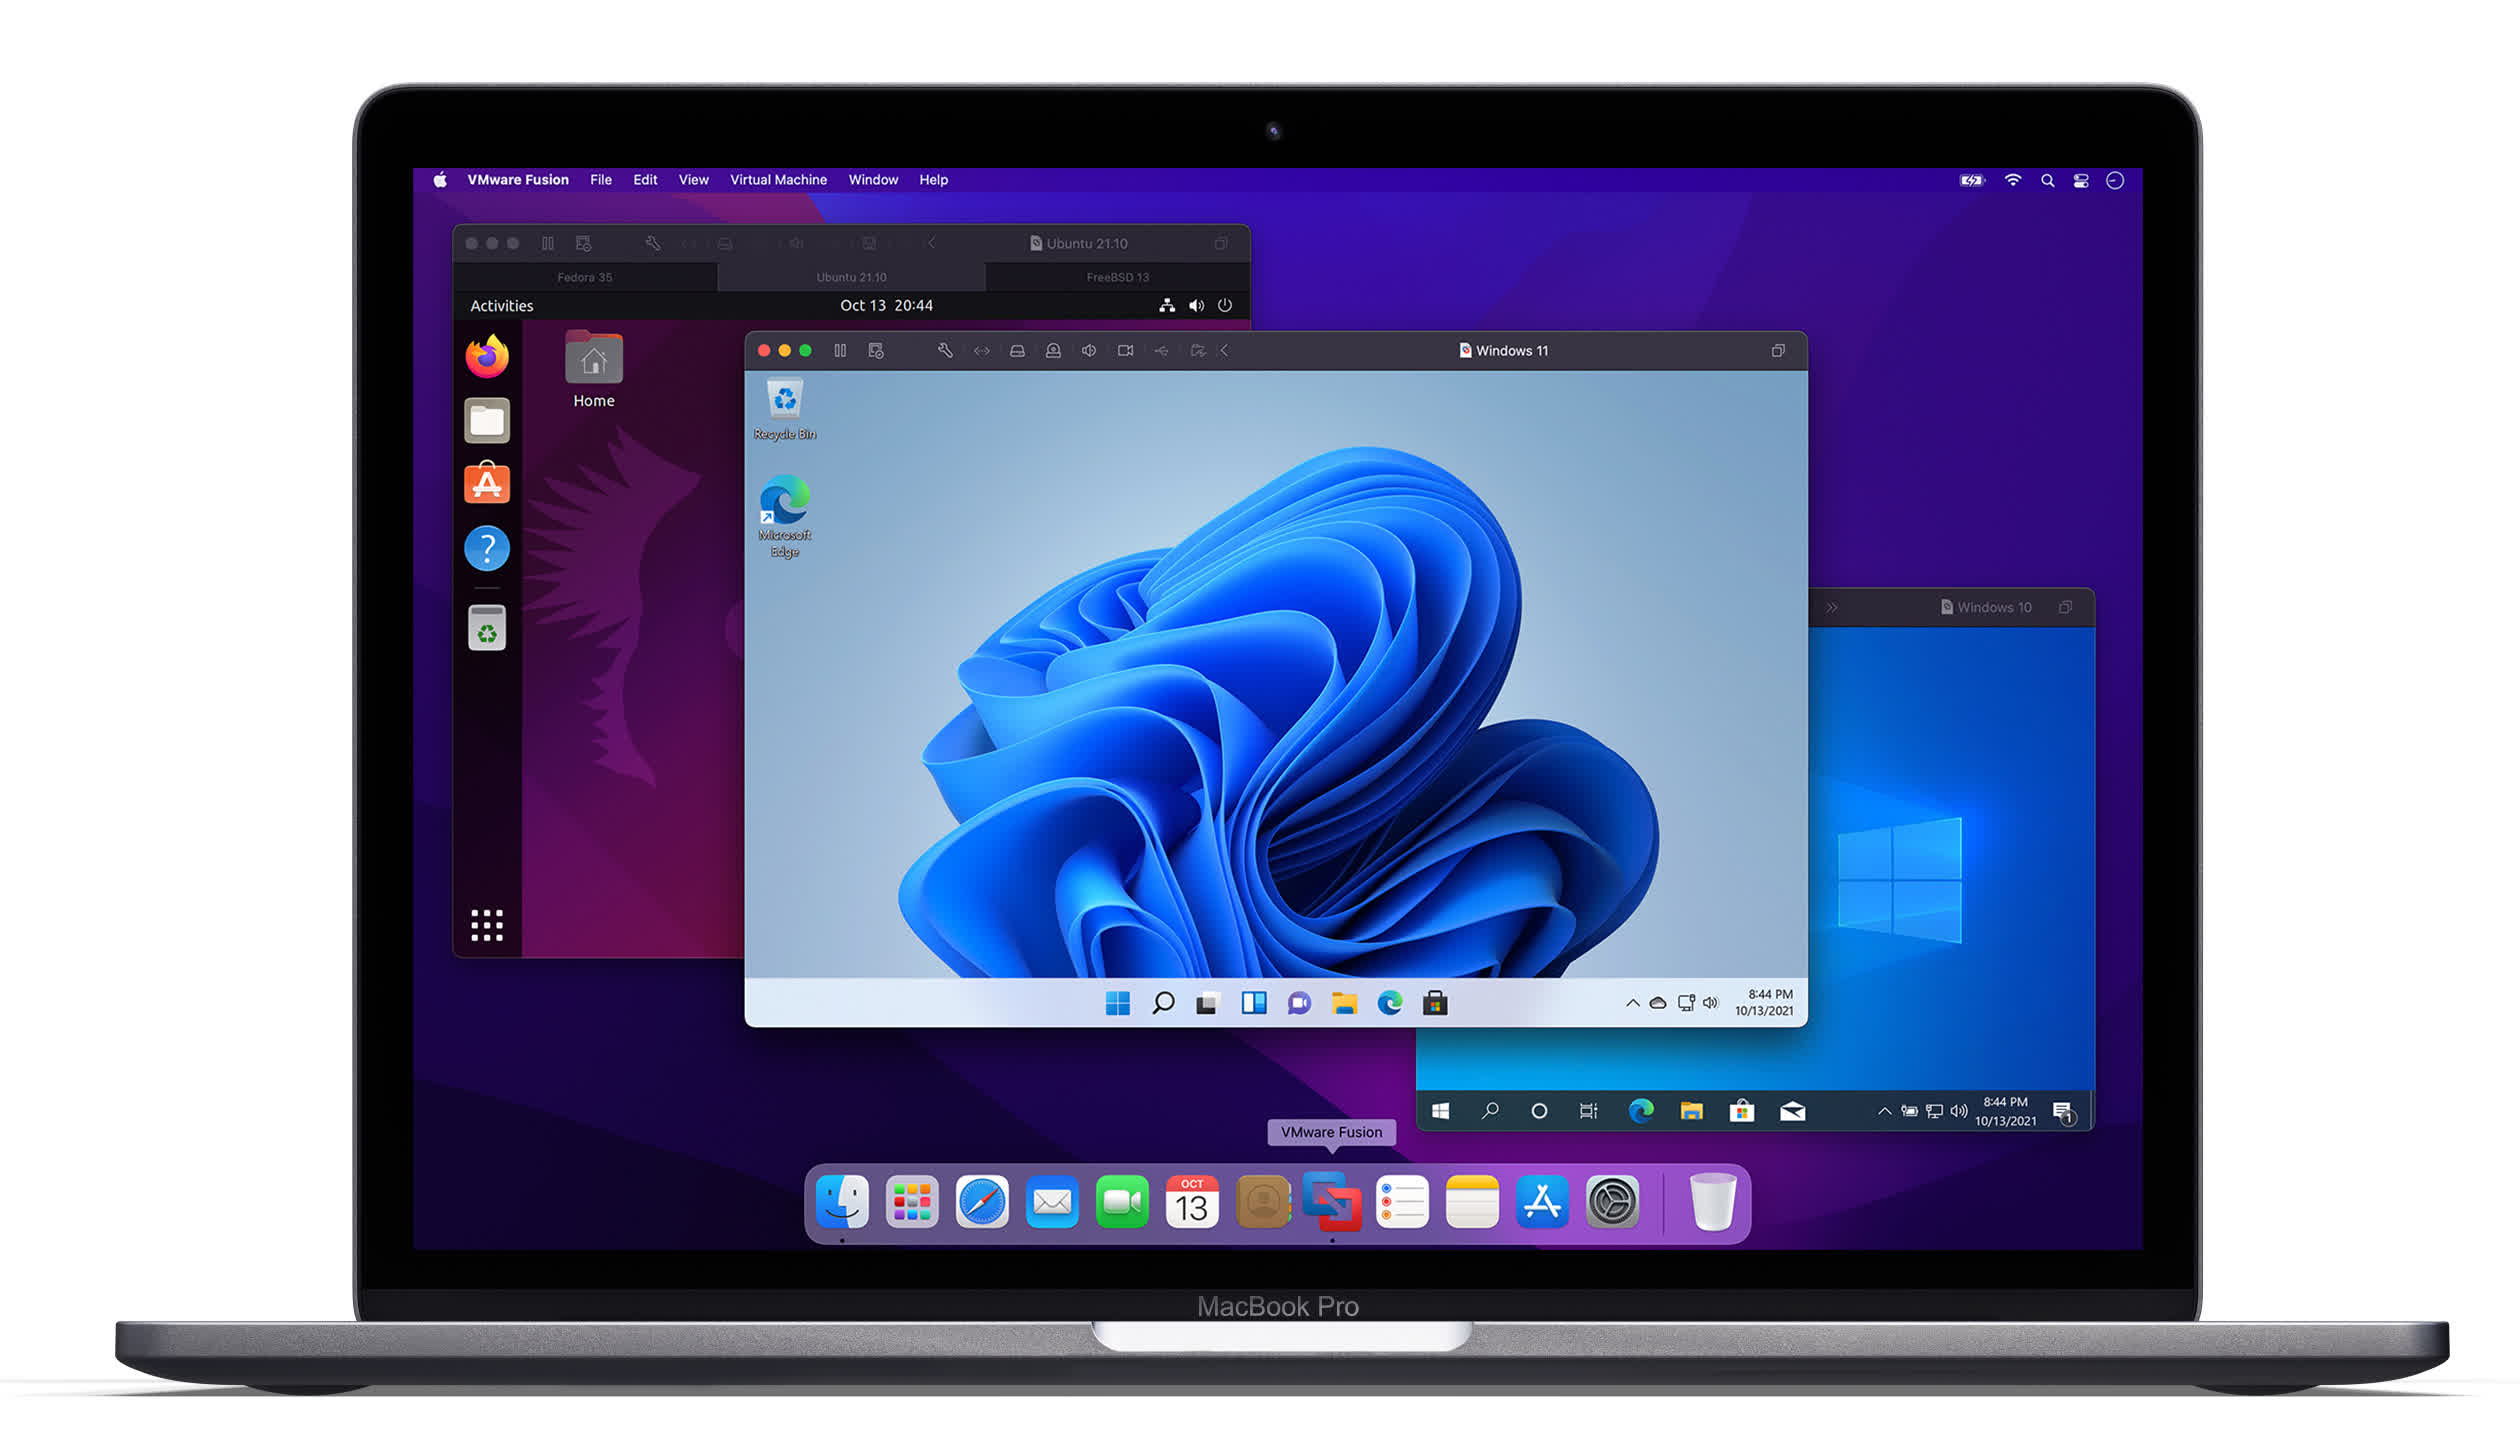 VMware Fusion can now use full 3D acceleration for Windows 11 Arm on Apple Silicon chips